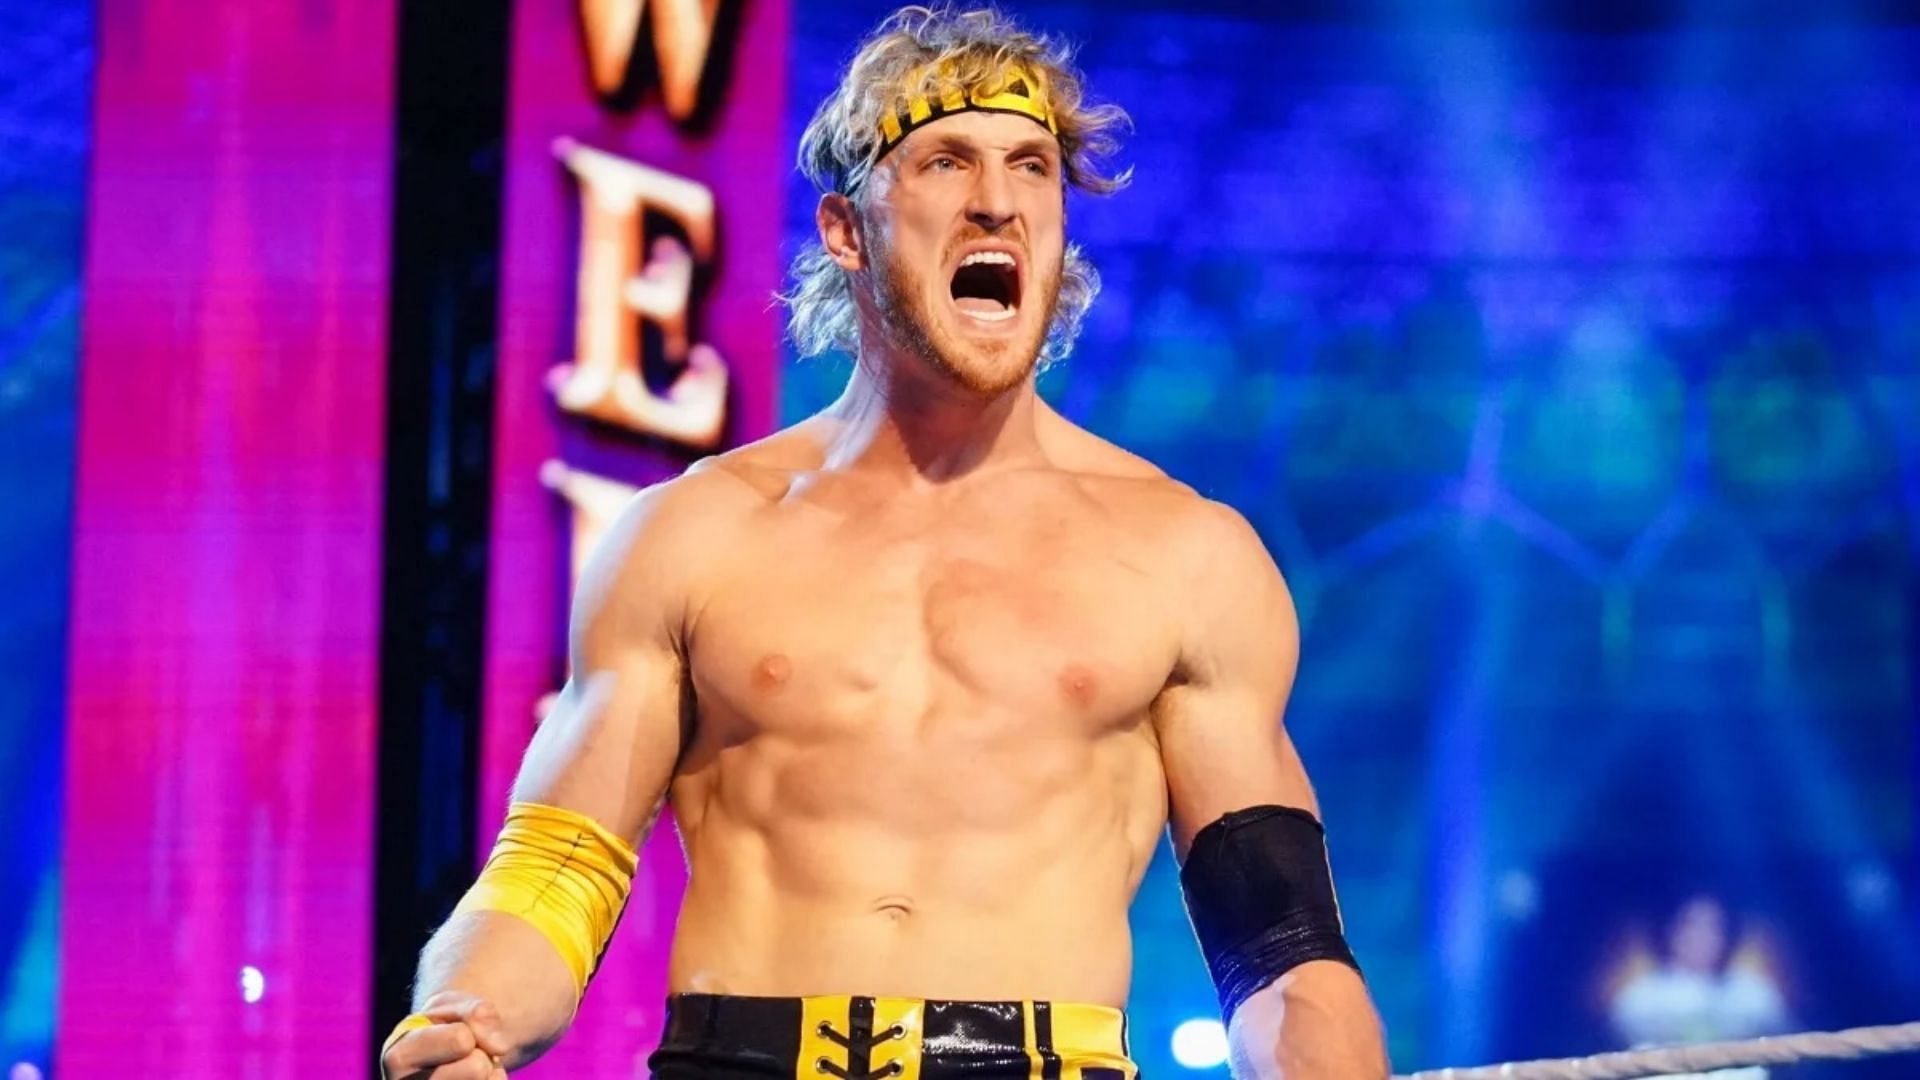 WWE reportedly has major plans for Logan Paul this summer